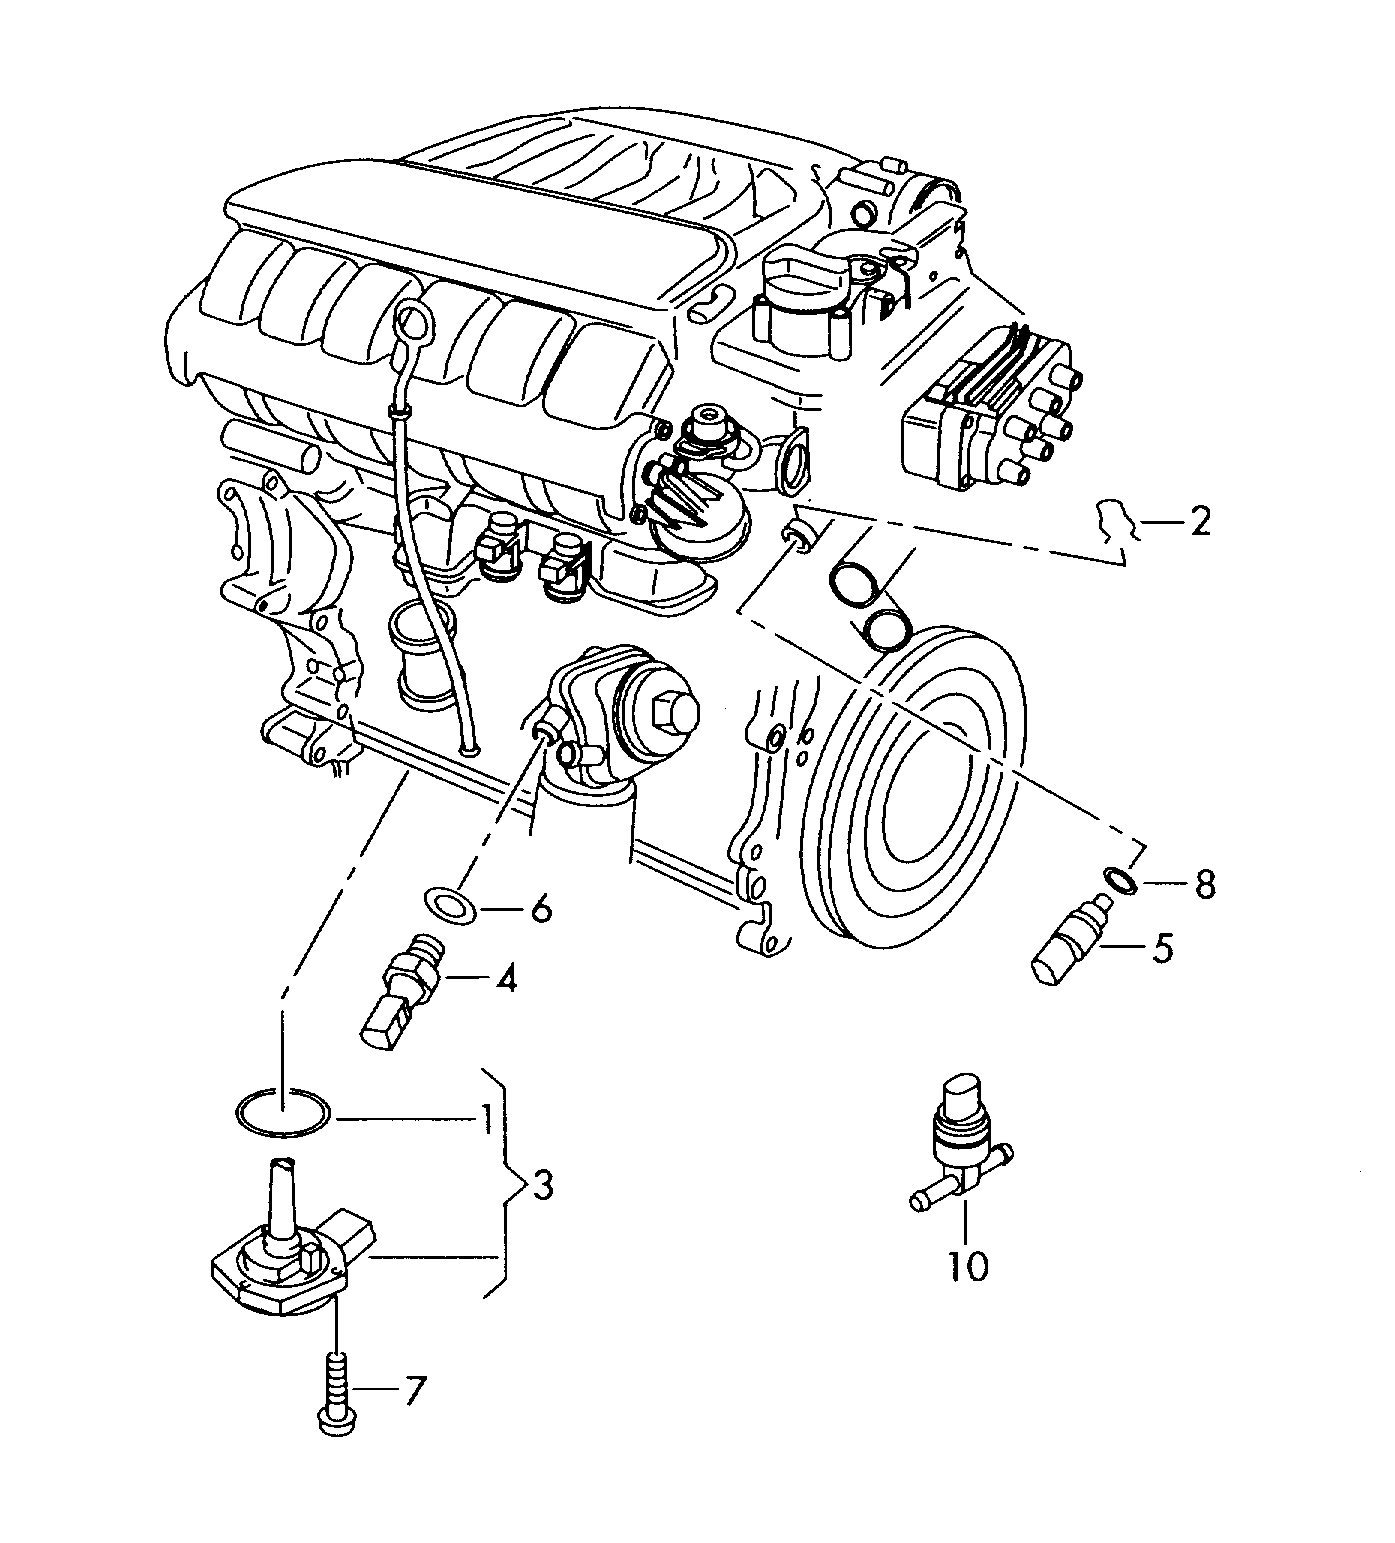 919-060 Touareg 7L switches and senders on engine 6-cylinder